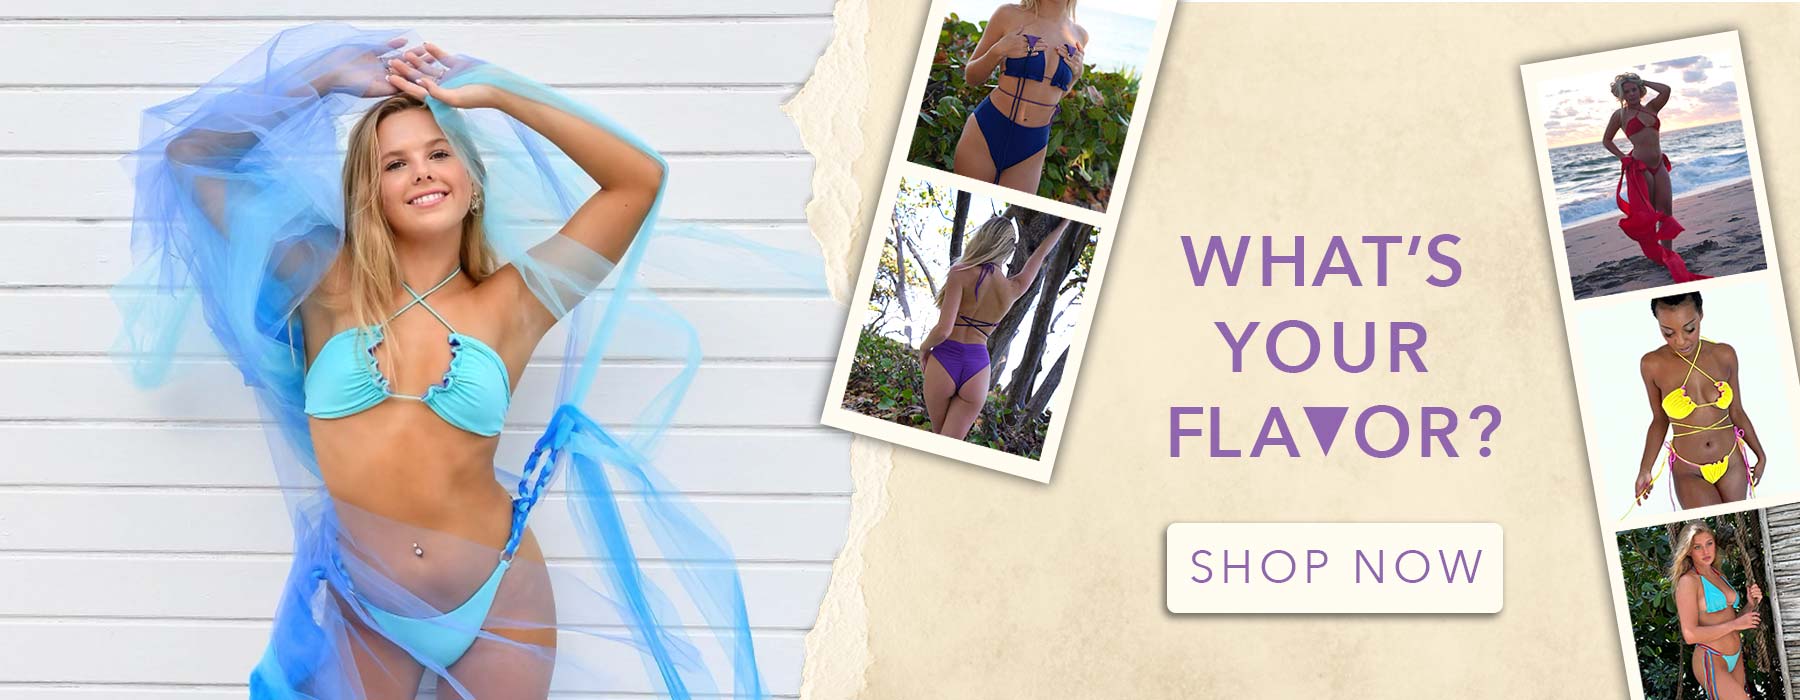 Bikini Flavors landing page with custom bikinis and models in colorful swimsuits